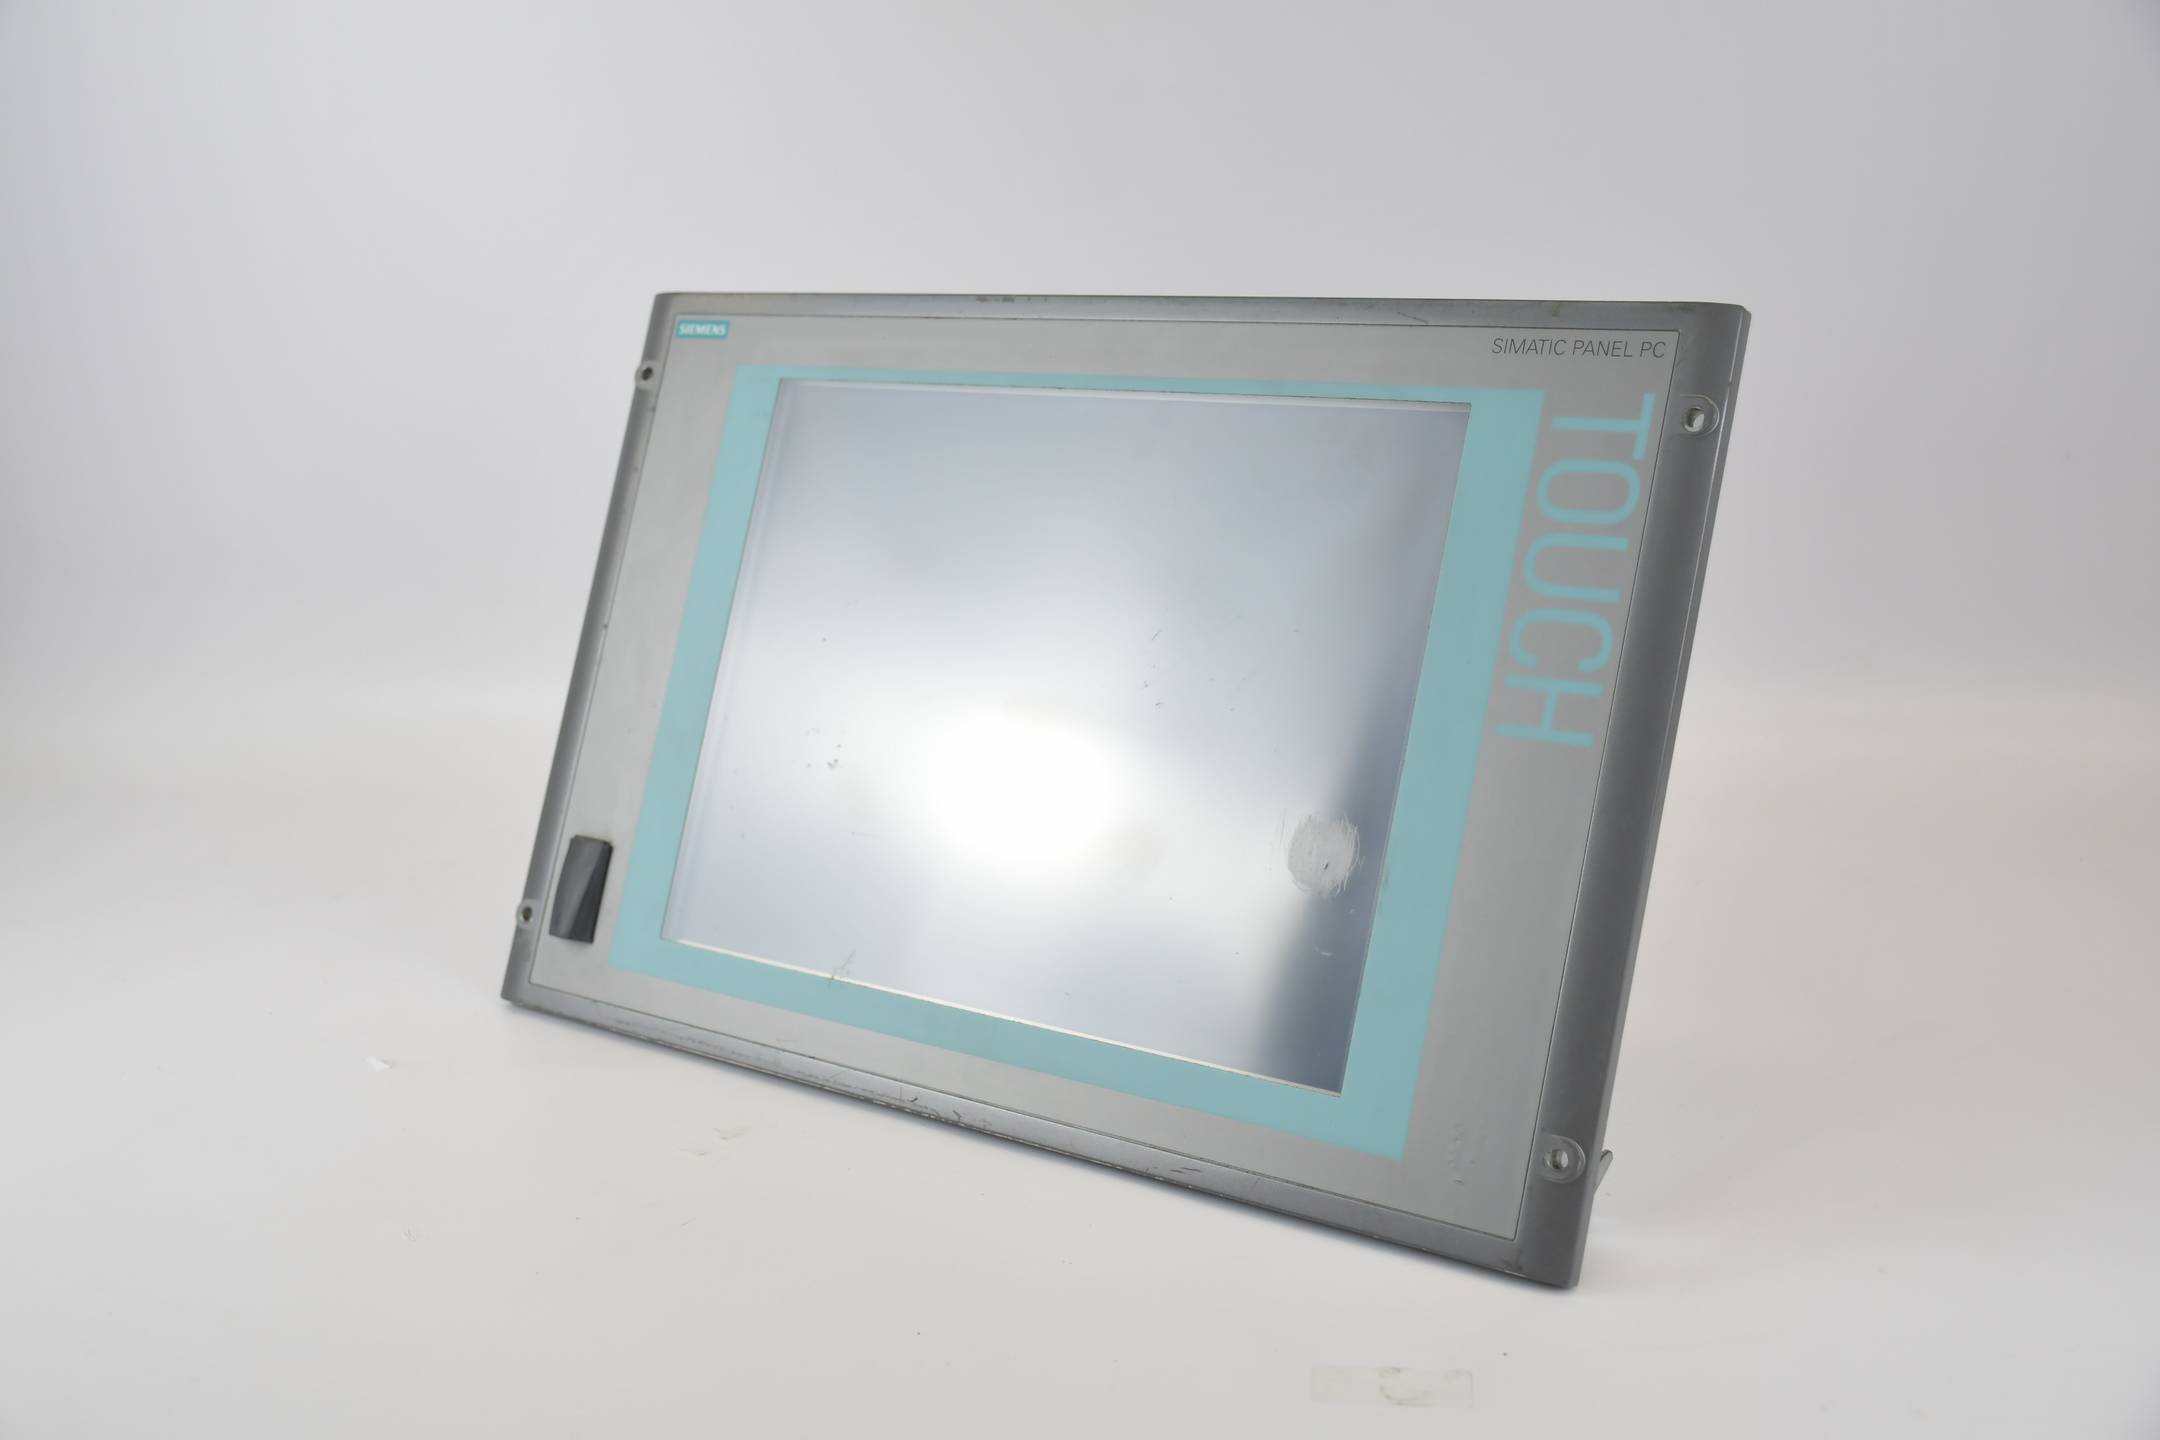 Siemens simatic Panel Series P6 577 15" Touch A5E00470984 